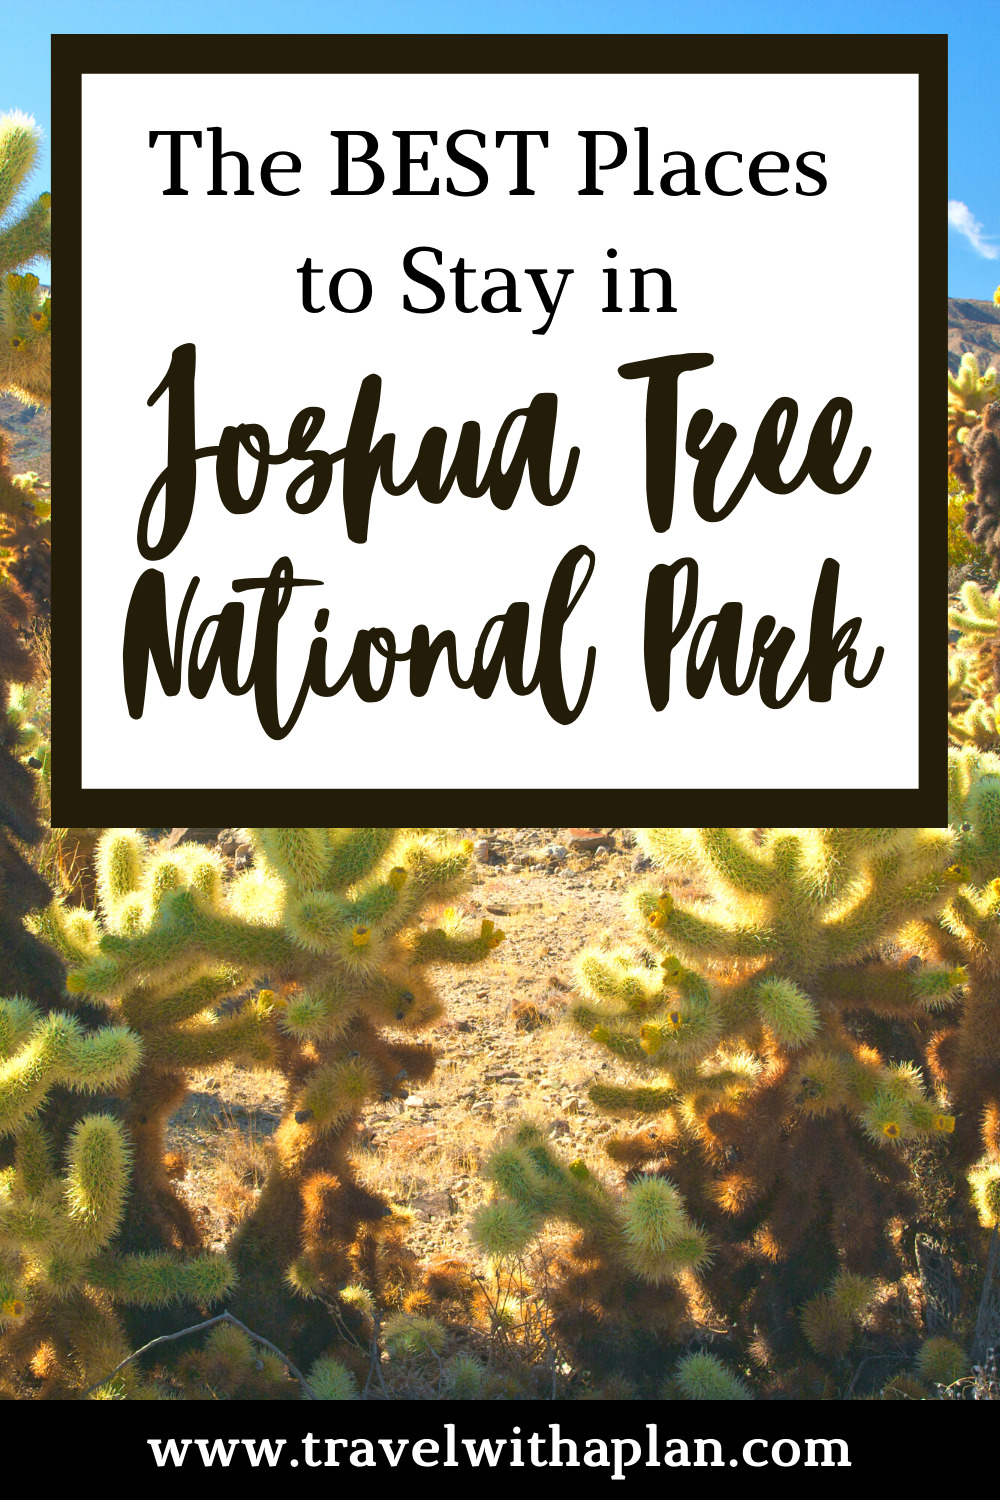 Discover the best places to stay in Joshua Tree National Park from top US family travel blog, Travel With A Plan!